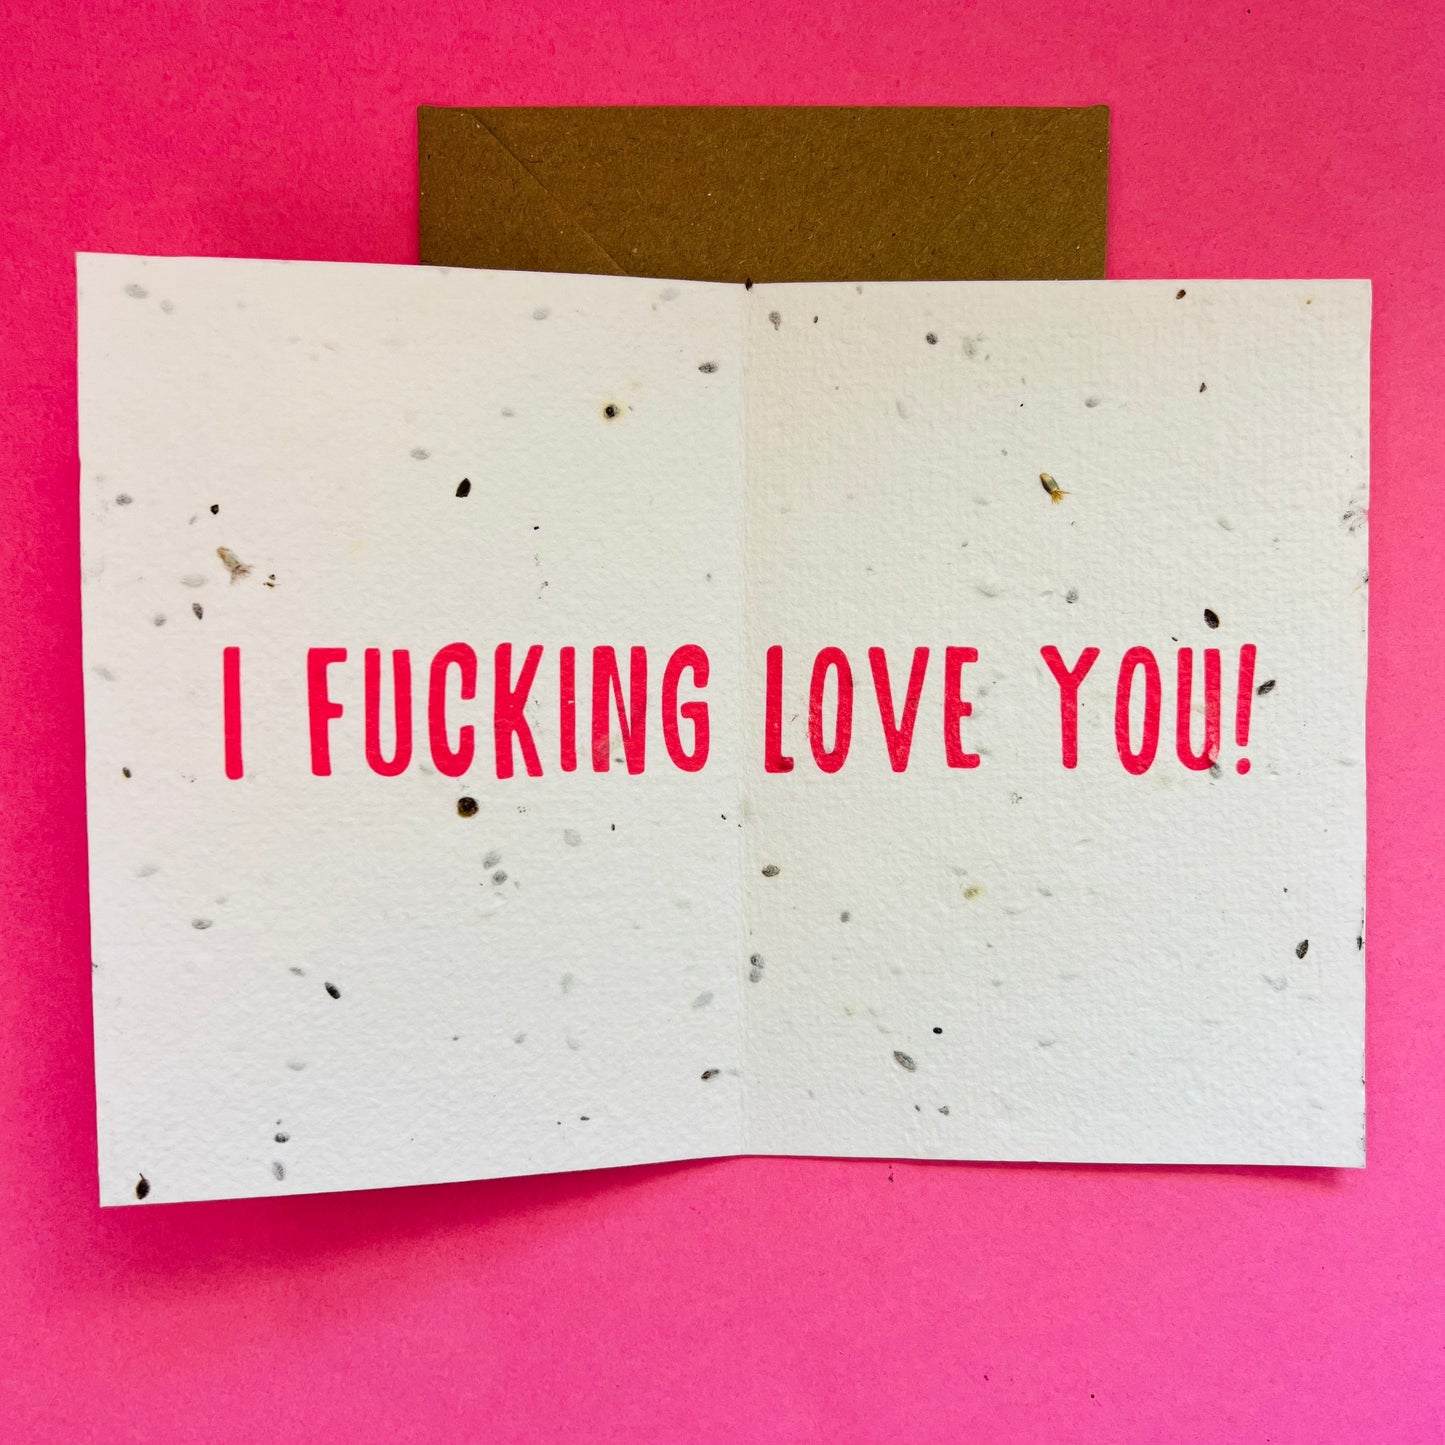 P.s. I don’t love you Plantable Seed Card